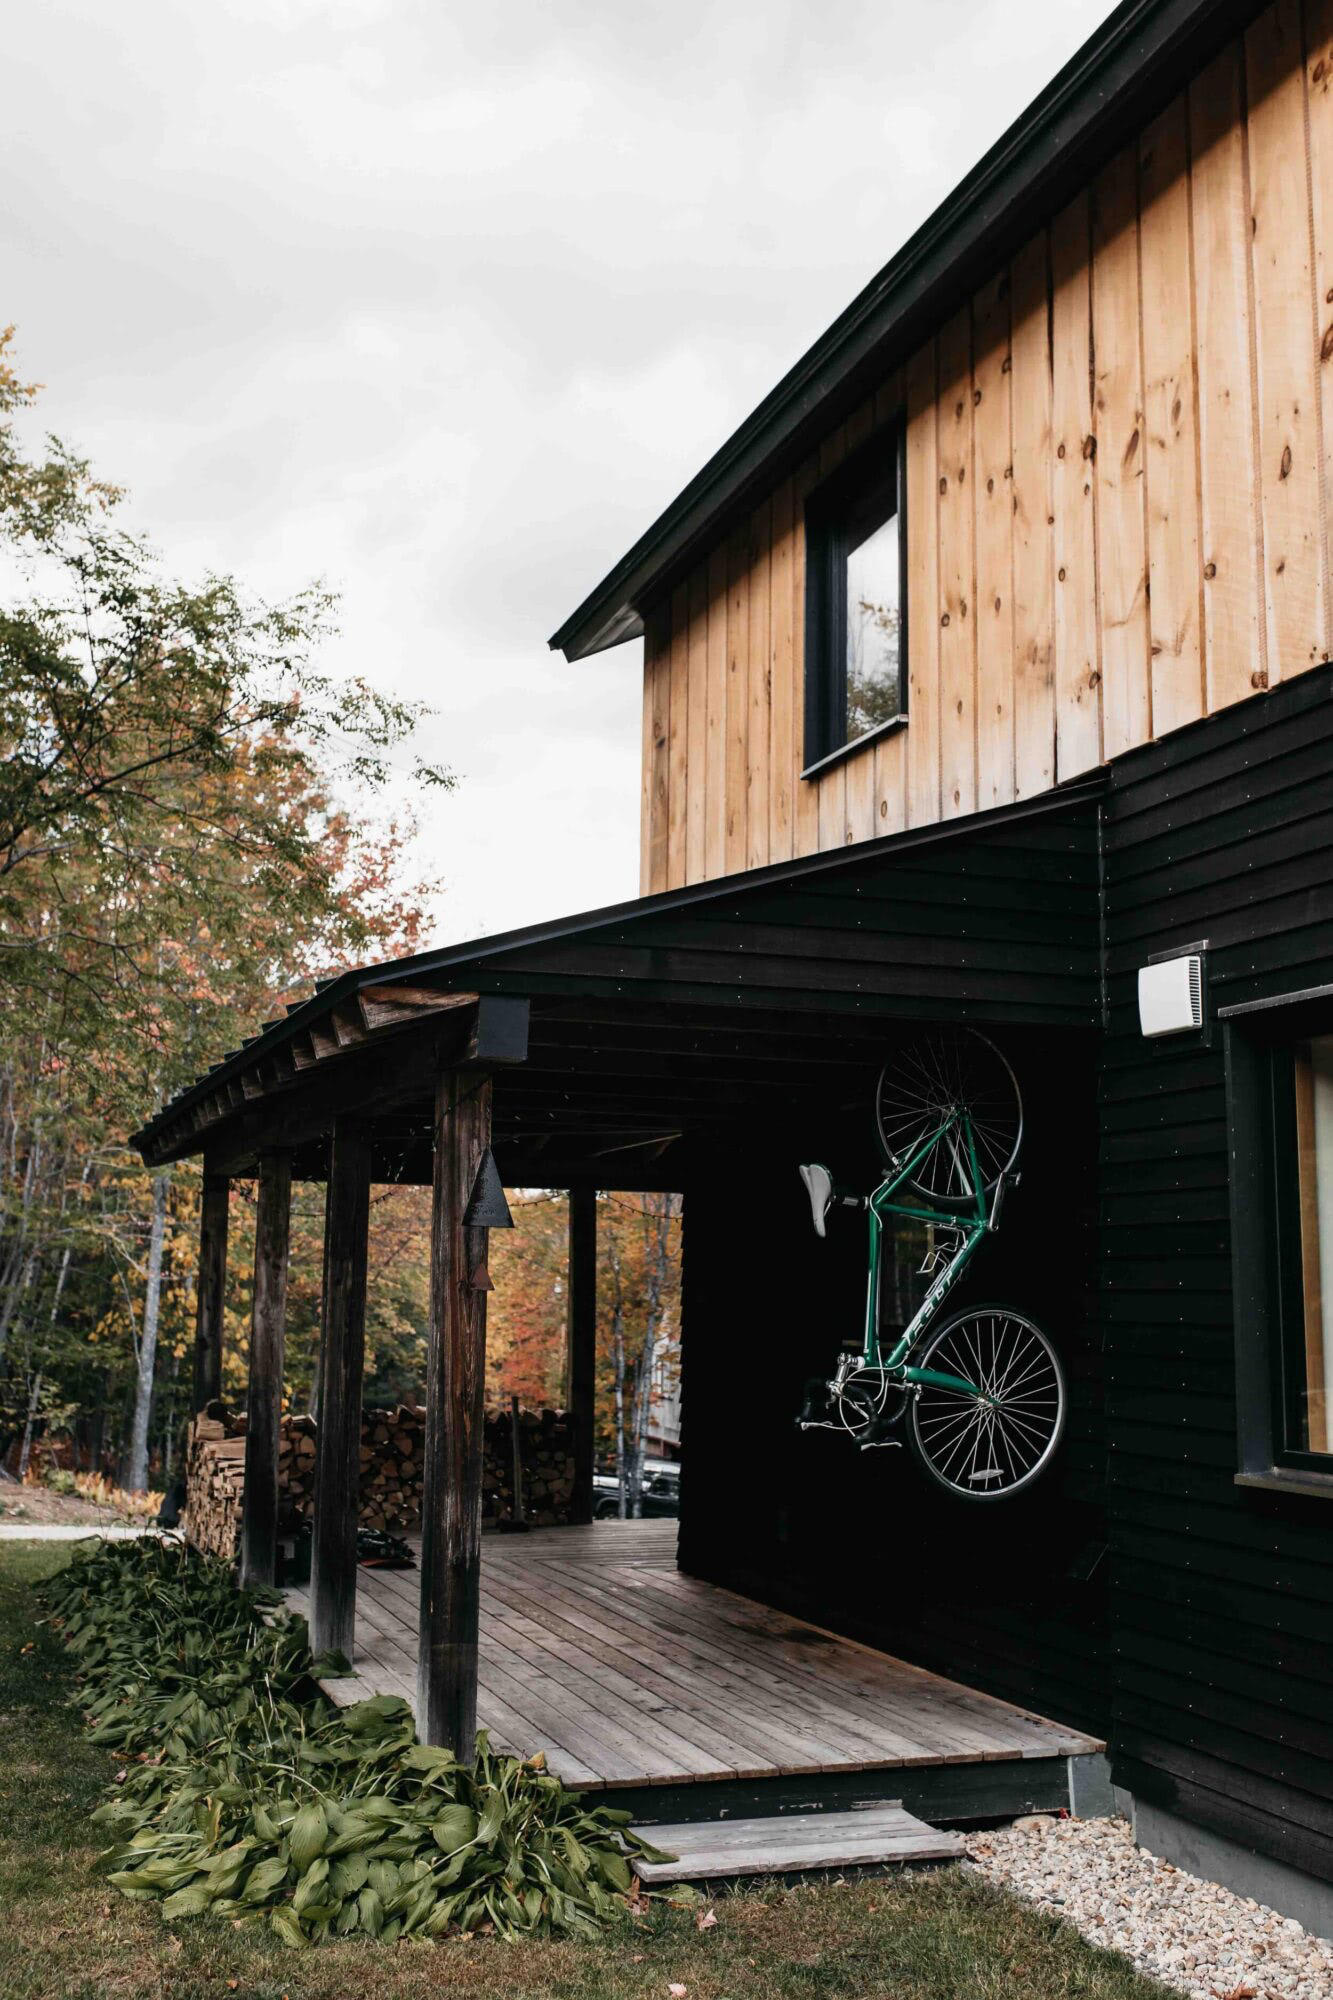  Retrofitting can be done over time, Jesper says. “You will eventually need new windows, so why not think about better windows? When you replace siding, that’s the perfect time to insulate.” 